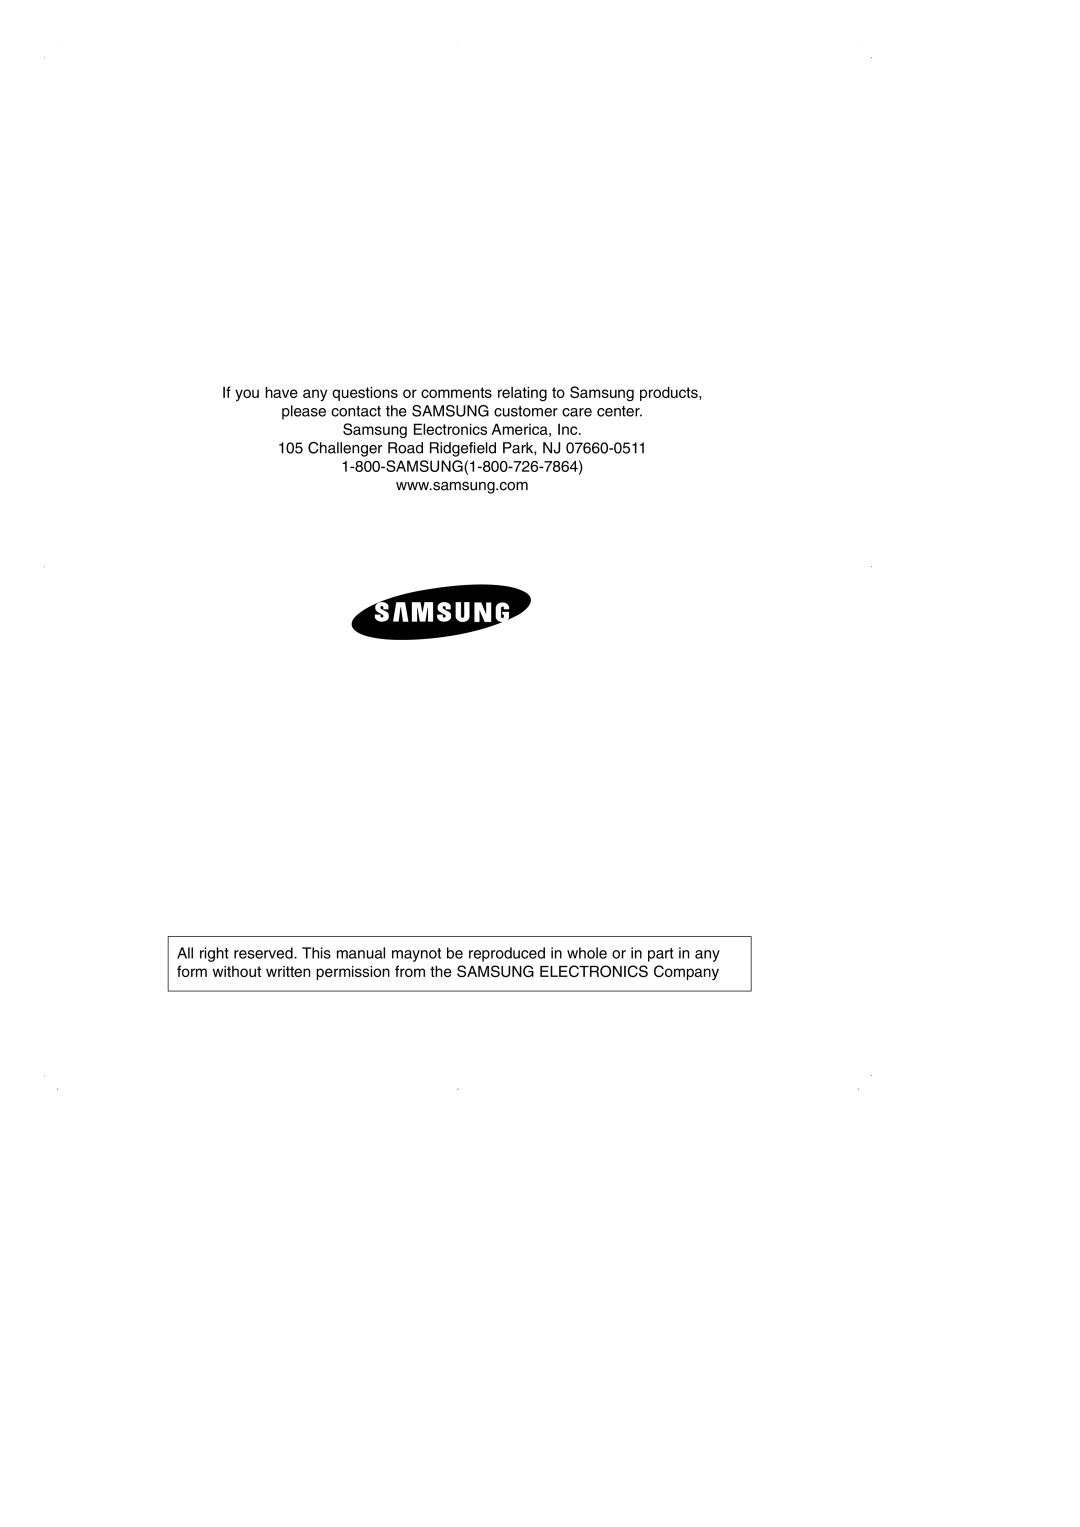 Samsung RS2531 installation instructions please contact the SAMSUNG customer care center, Samsung Electronics America, Inc 